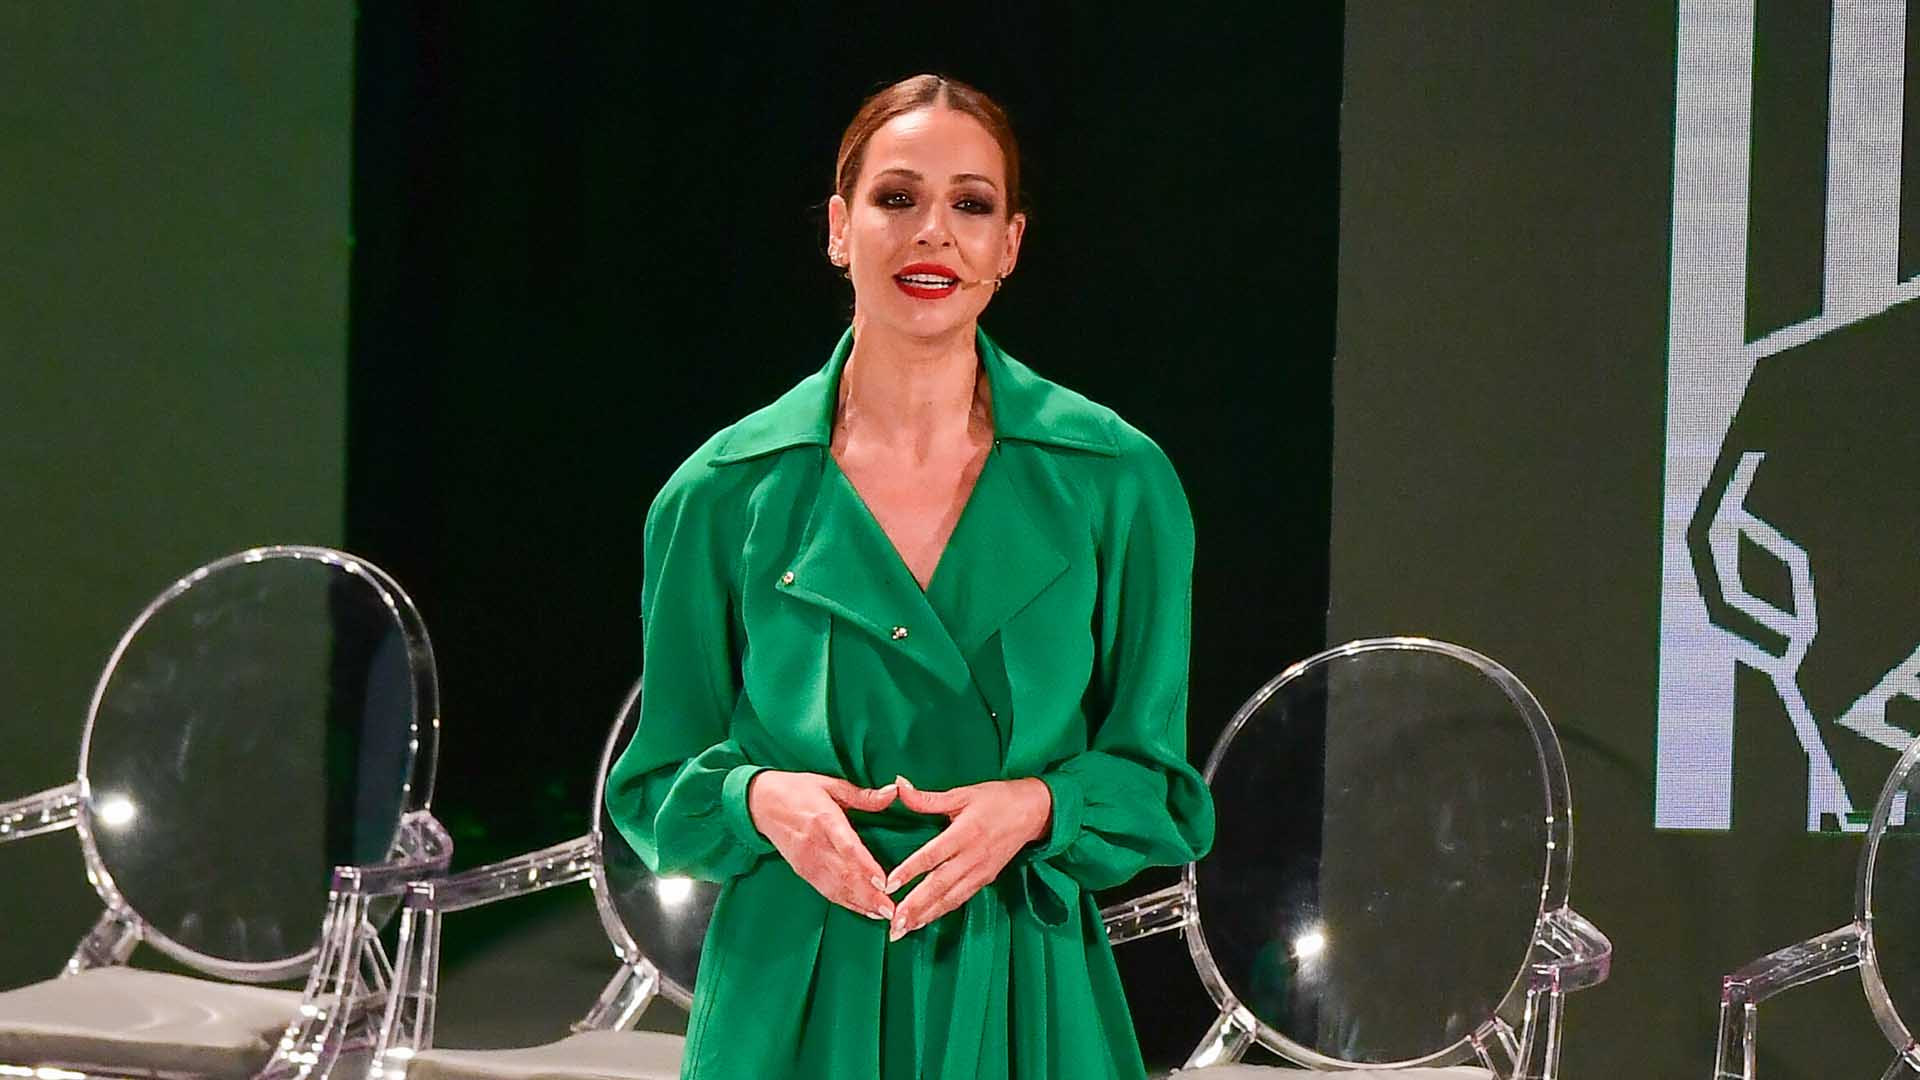 Presenter and former miss Eva GonzÃ¡lez during the gala of the delivery of the medals of Andalucia  in Sevilla on Monday, 28 February 2022.